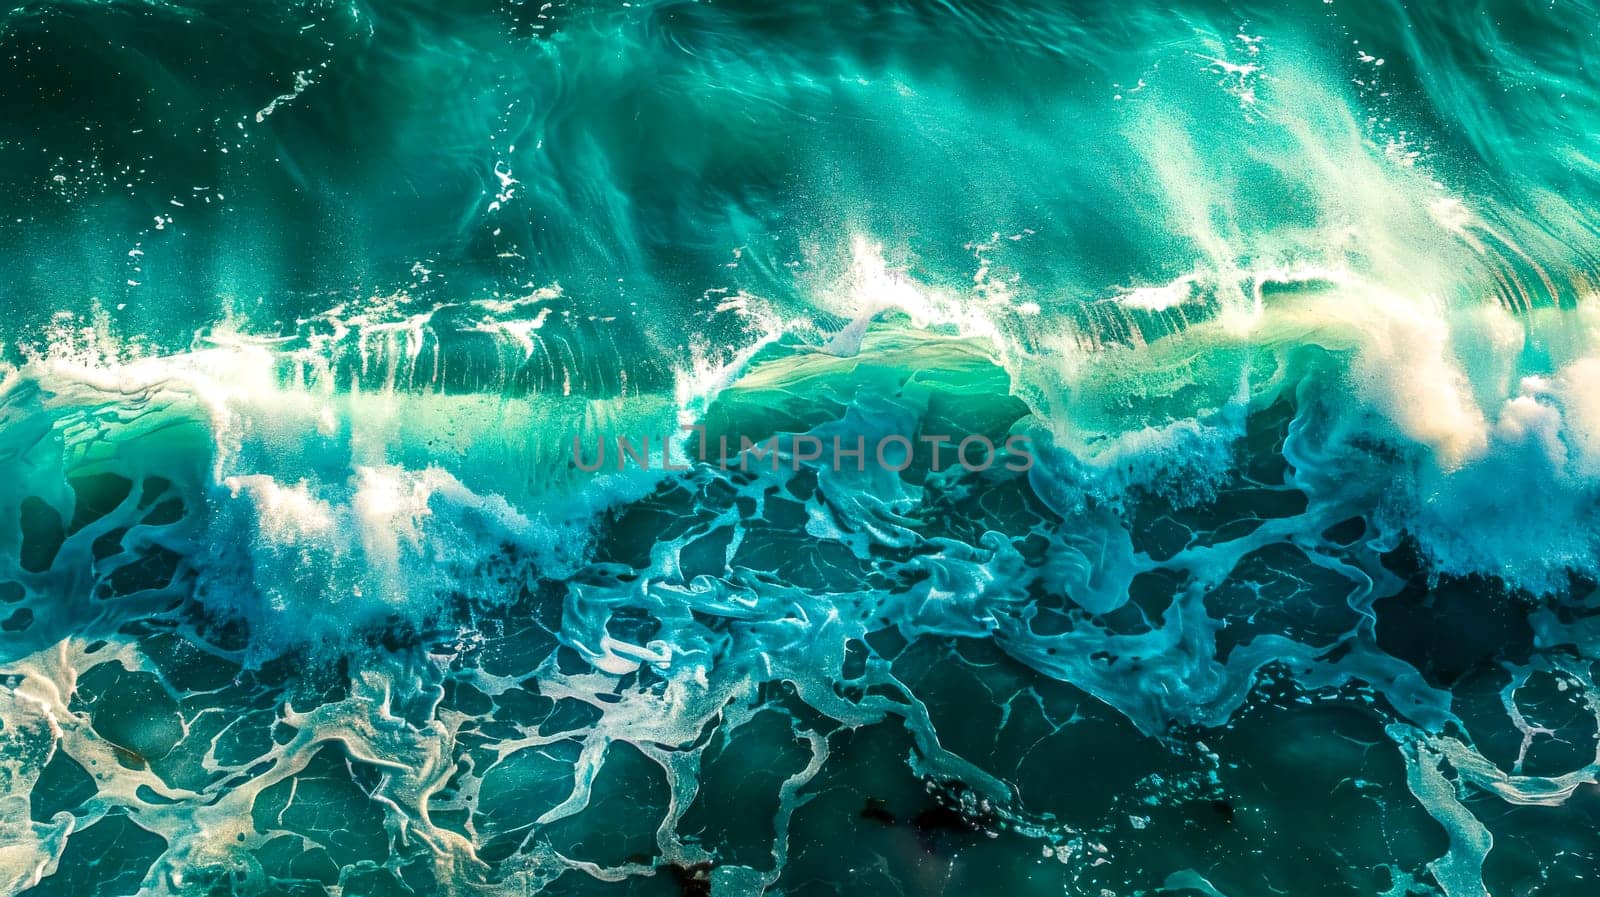 Overhead shot captures the dynamic turquoise textures of a wave breaking in the ocean